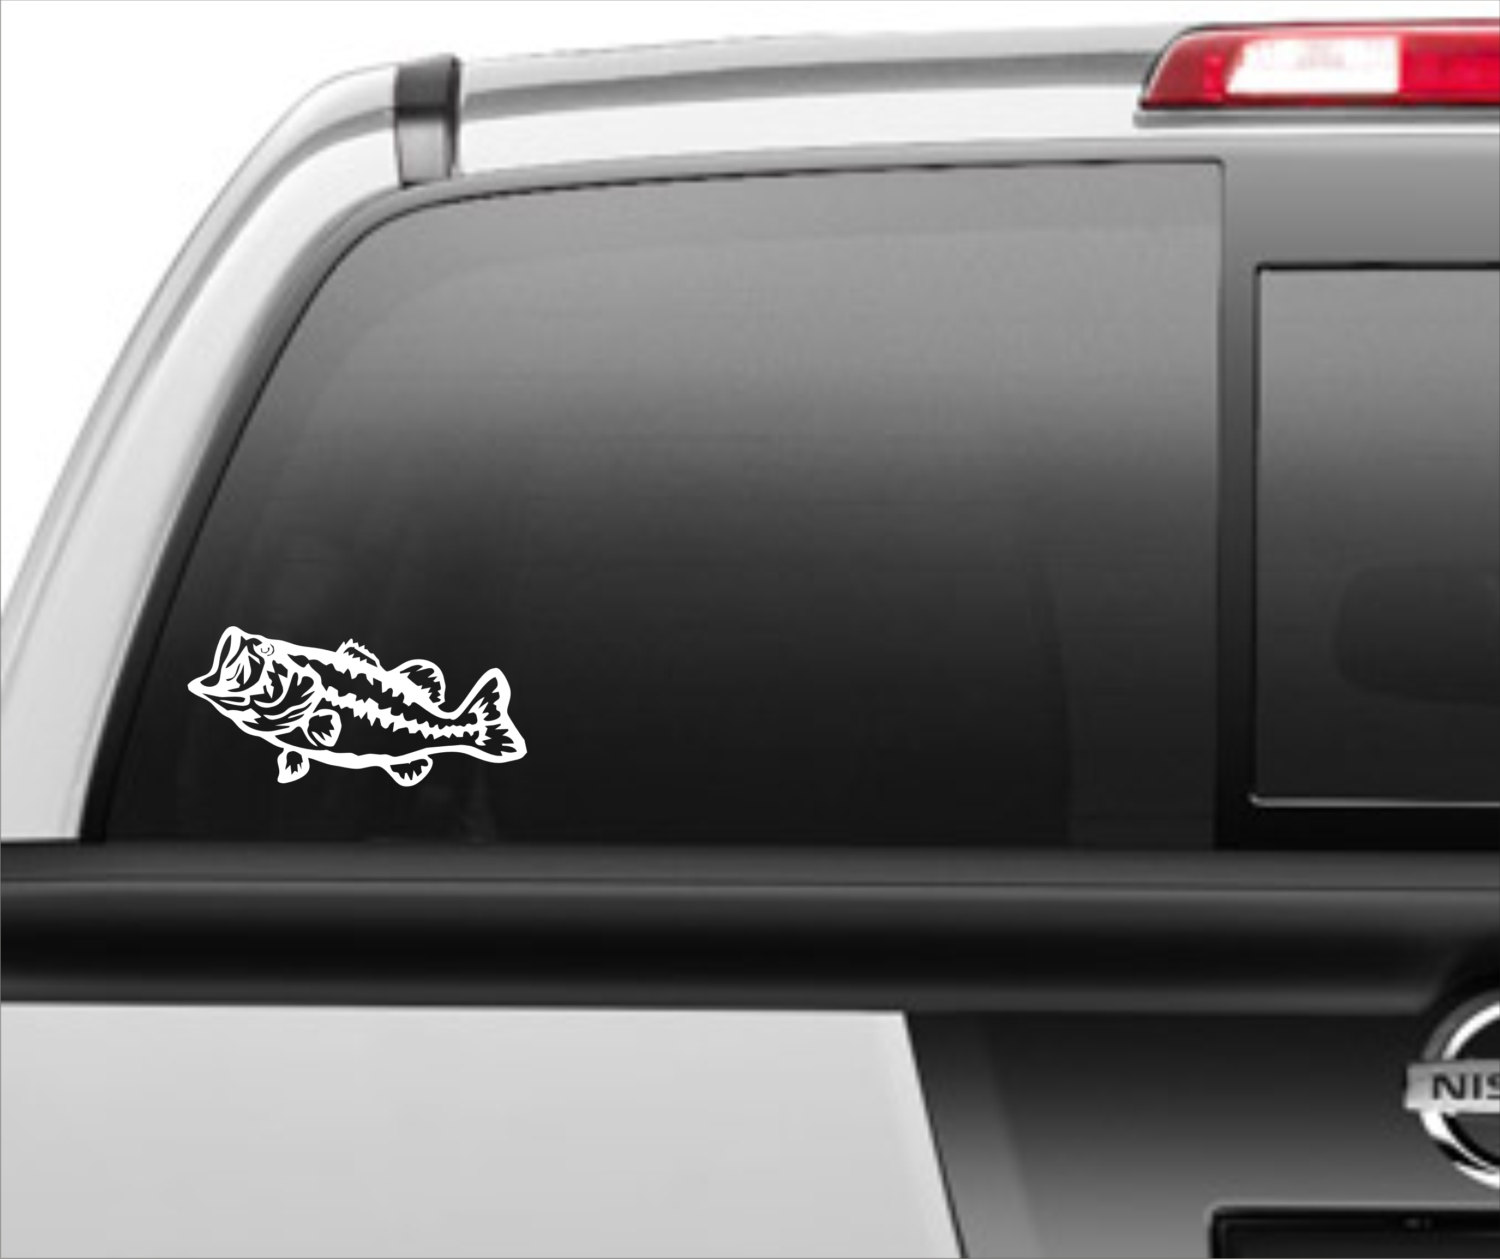 Bass Fishing - Sticker Graphic - Auto, Wall, Laptop, Cell, Truck Sticker  for Windows, Cars, Trucks